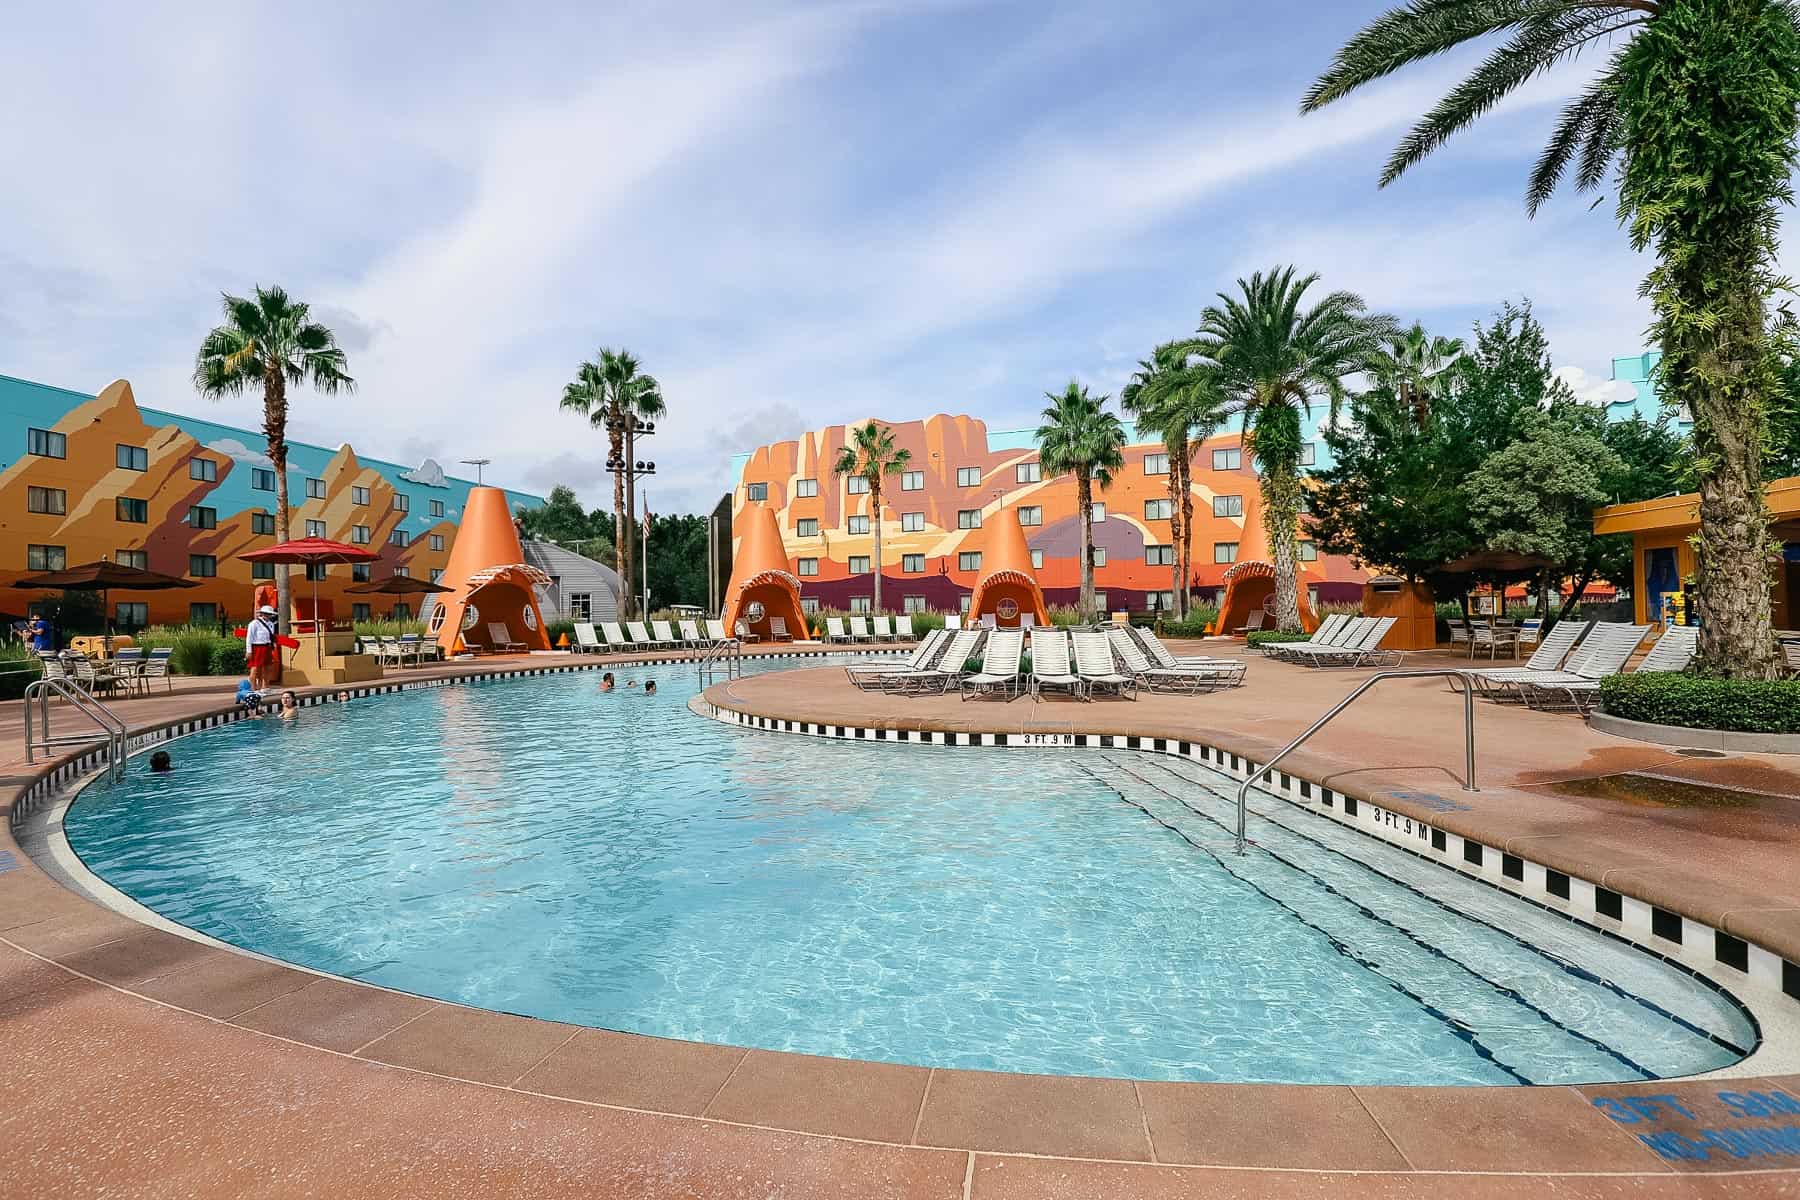 Cozy Cone Pool at Art of Animation Resort 